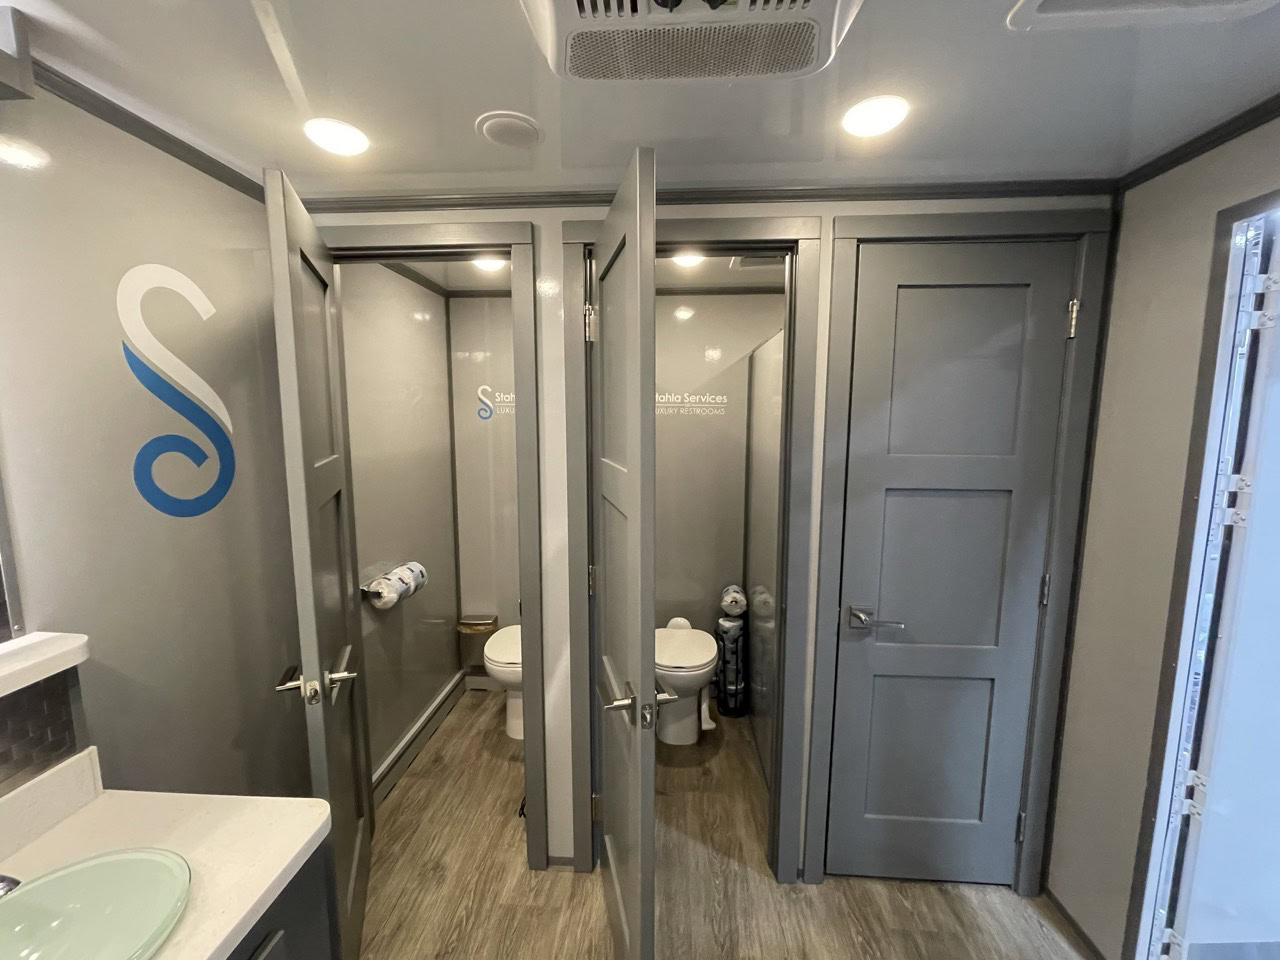 a clean, modern 6 stall restroom trailer featuring three stalls with a toilet, a urinal in another, and the third containing a sink area with a mirror. light grey walls and doors are prominent throughout.